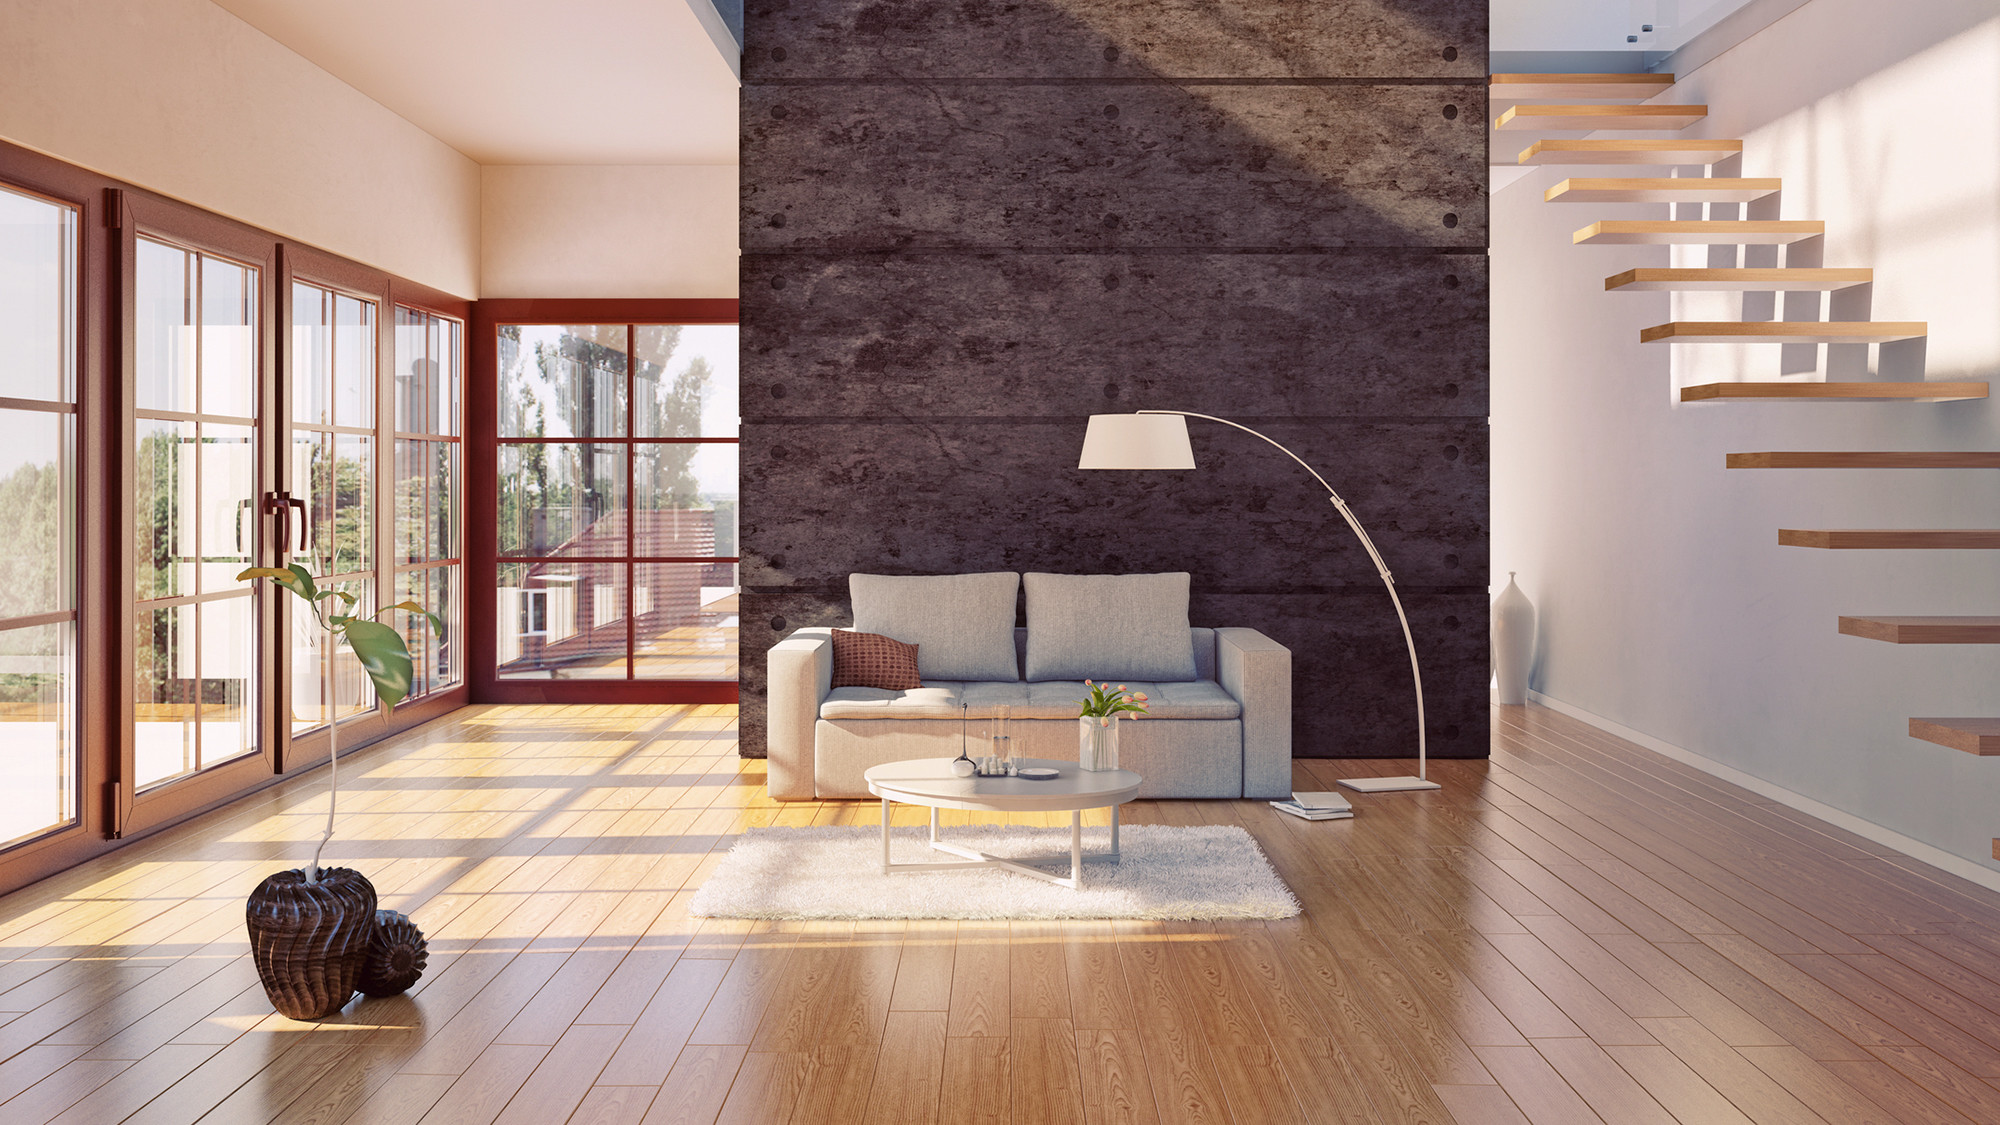 26 Spectacular Average Price Per Square Foot to Install Hardwood Flooring 2024 free download average price per square foot to install hardwood flooring of do hardwood floors provide the best return on investment realtor coma within hardwood floors investment